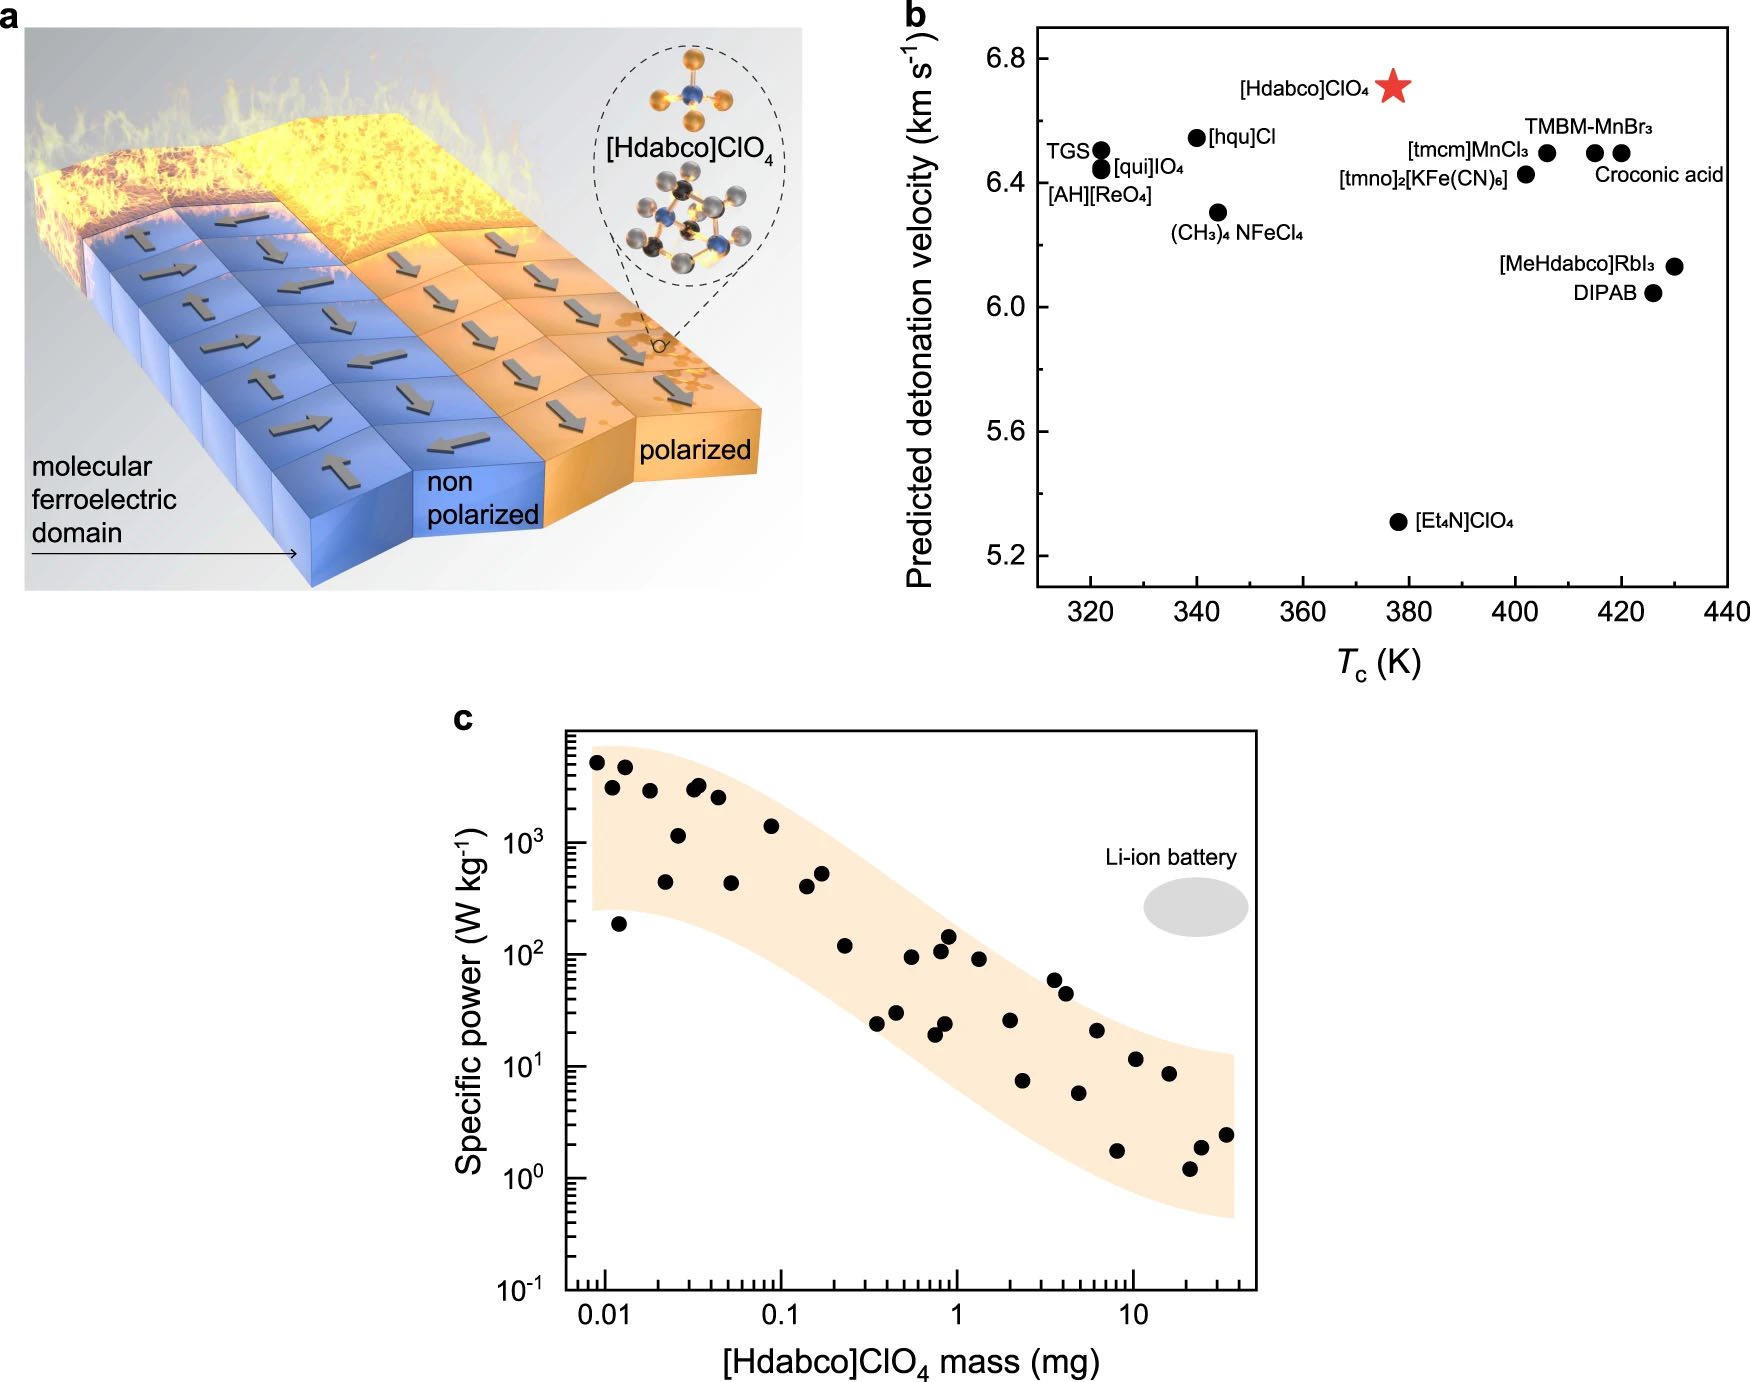 Schematic figure for the polarization control of decomposition for molecular ferroelectrics